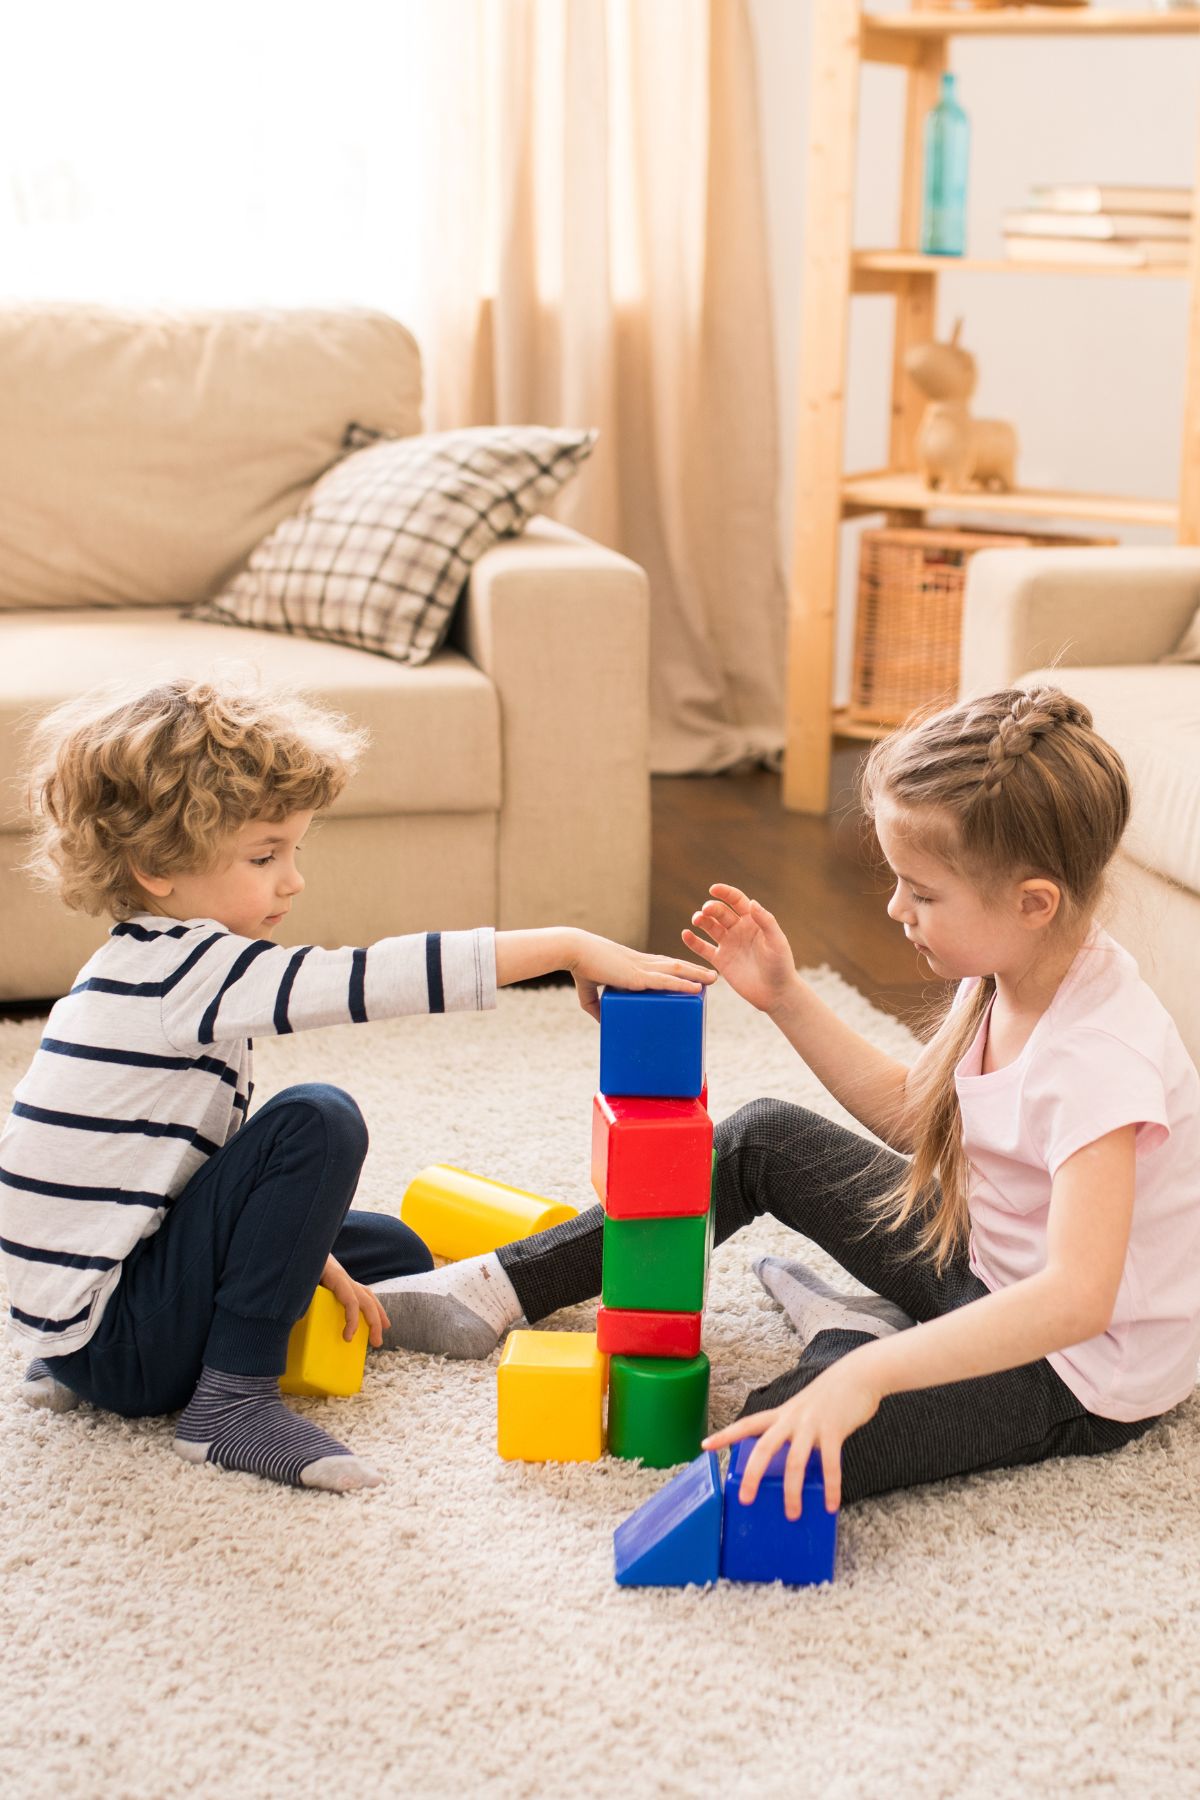 Siblings build a tower out of blocks in a living room.